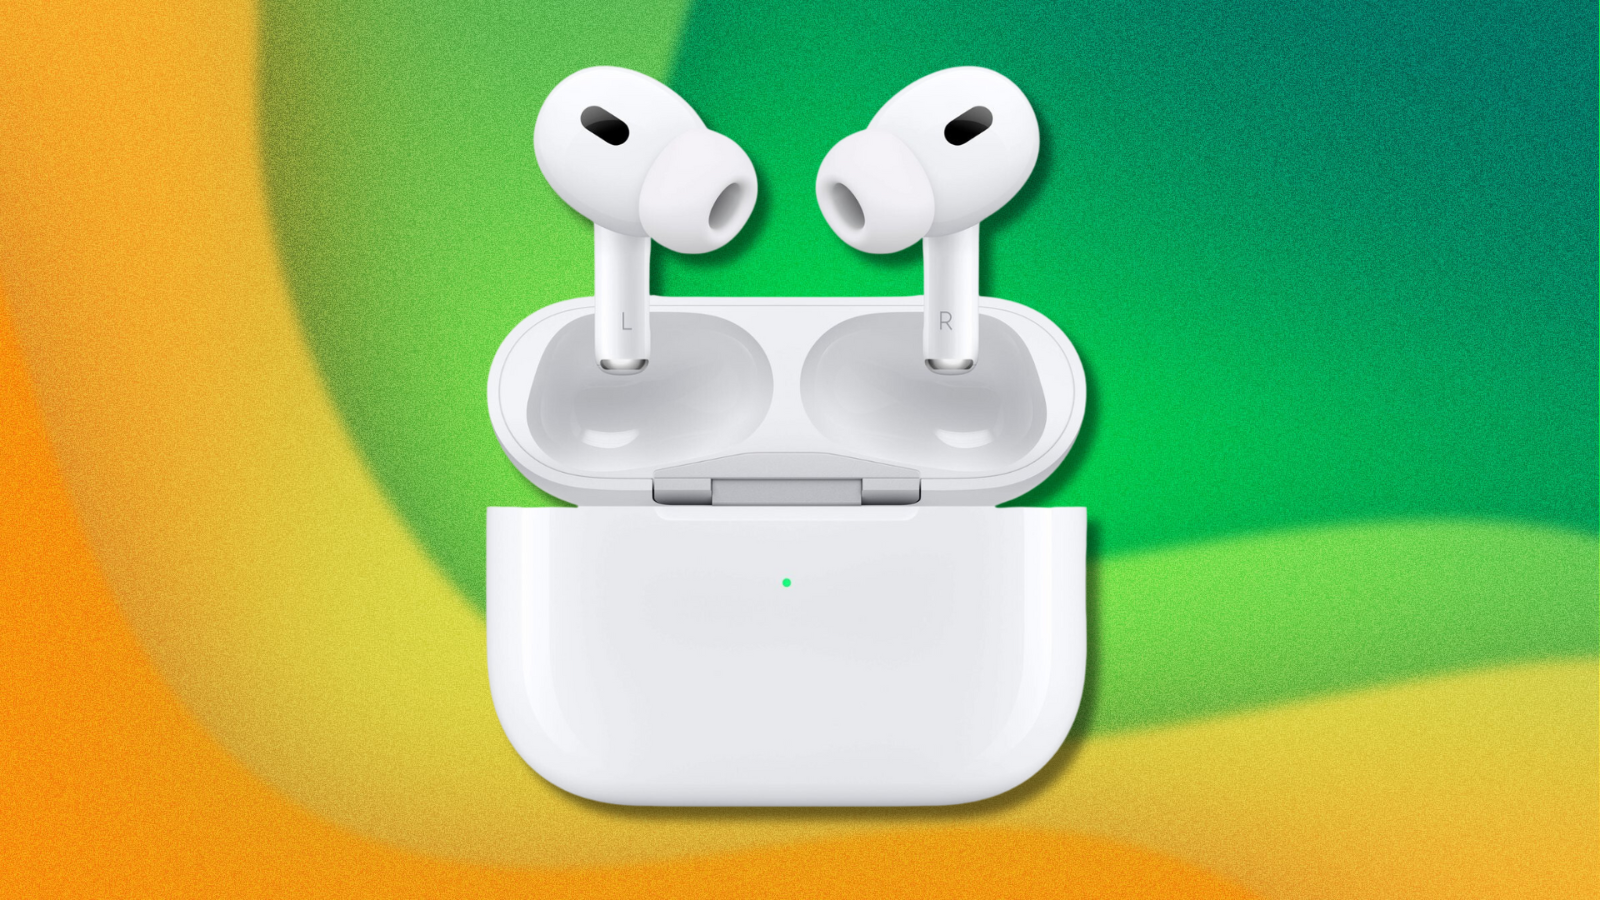 Apple AirPods Pro on green and yellow abstract background